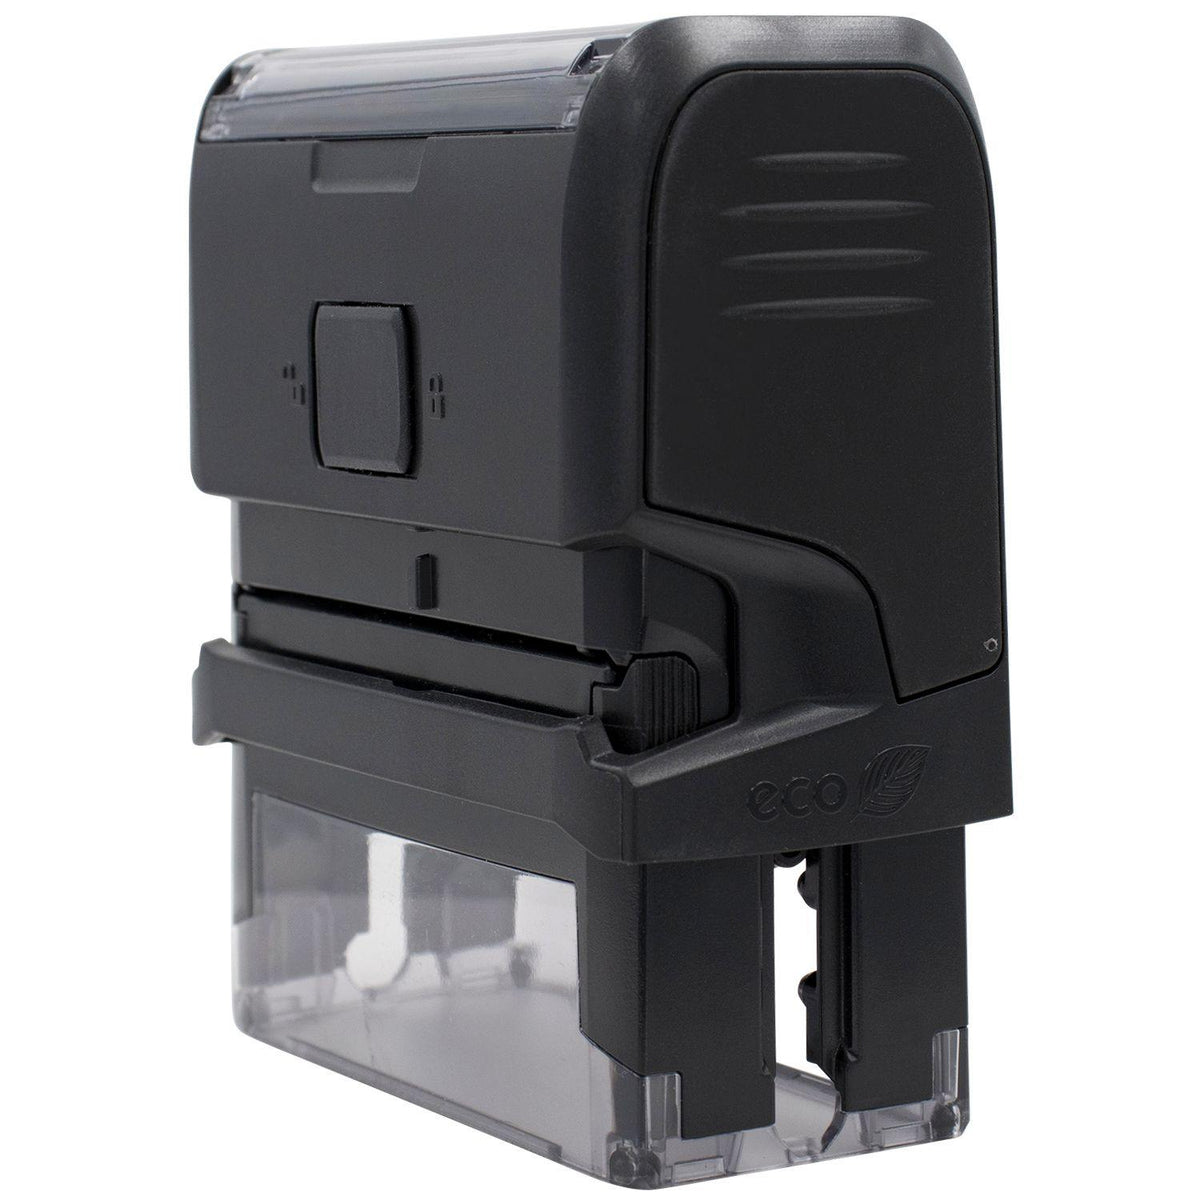 Self Inking Change Of Address Stamp - Engineer Seal Stamps - Brand_Trodat, Impression Size_Small, Stamp Type_Self-Inking Stamp, Type of Use_Office